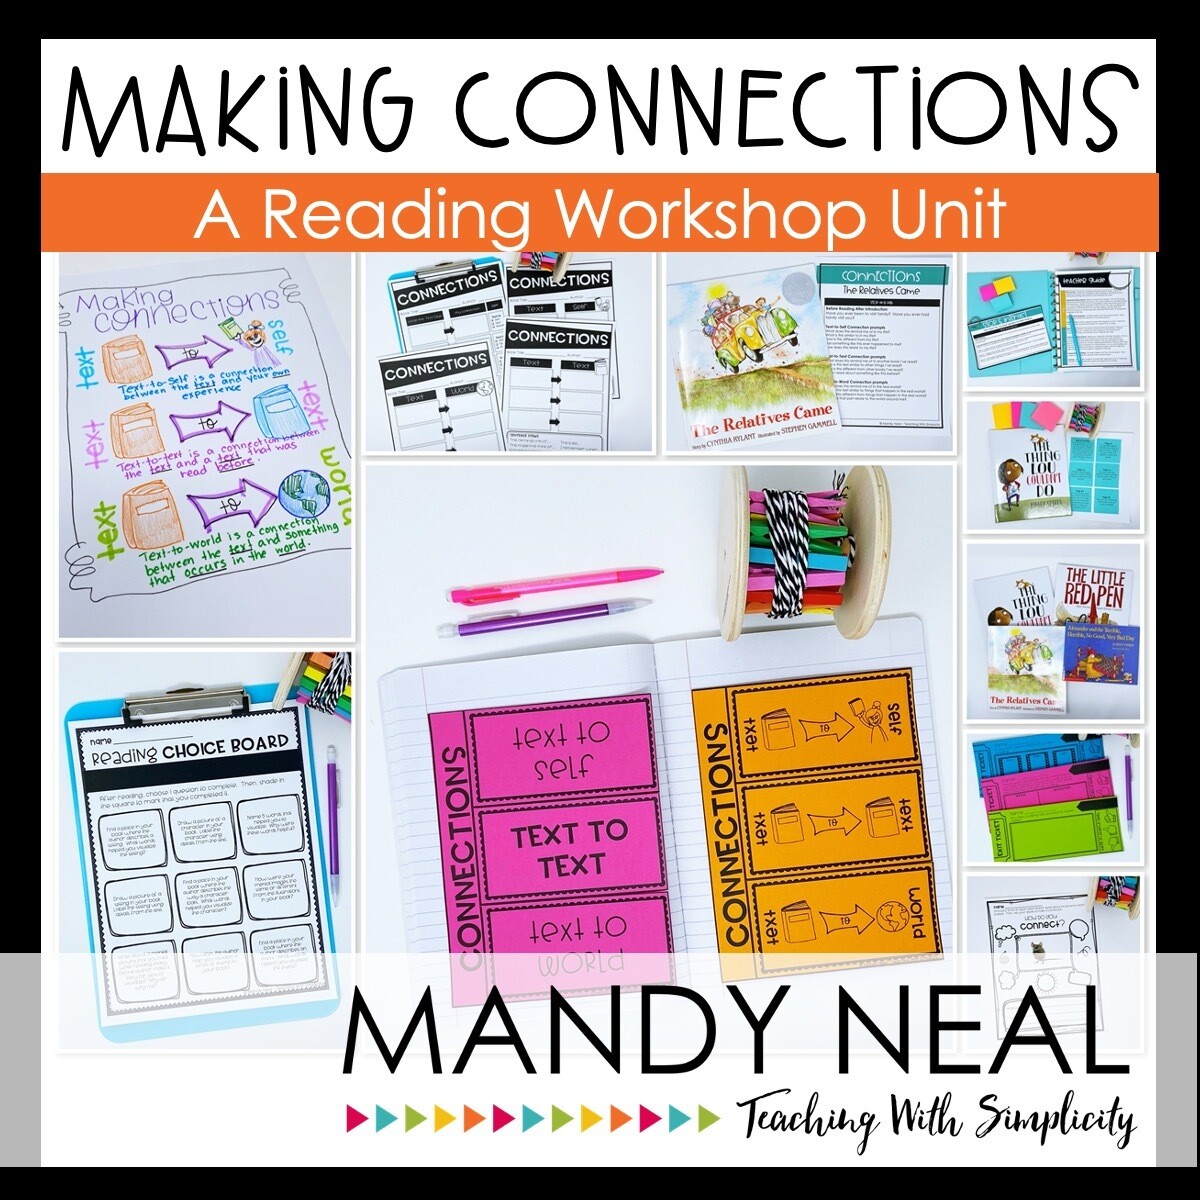 Making Connections Reading Workshop Unit (Printable)